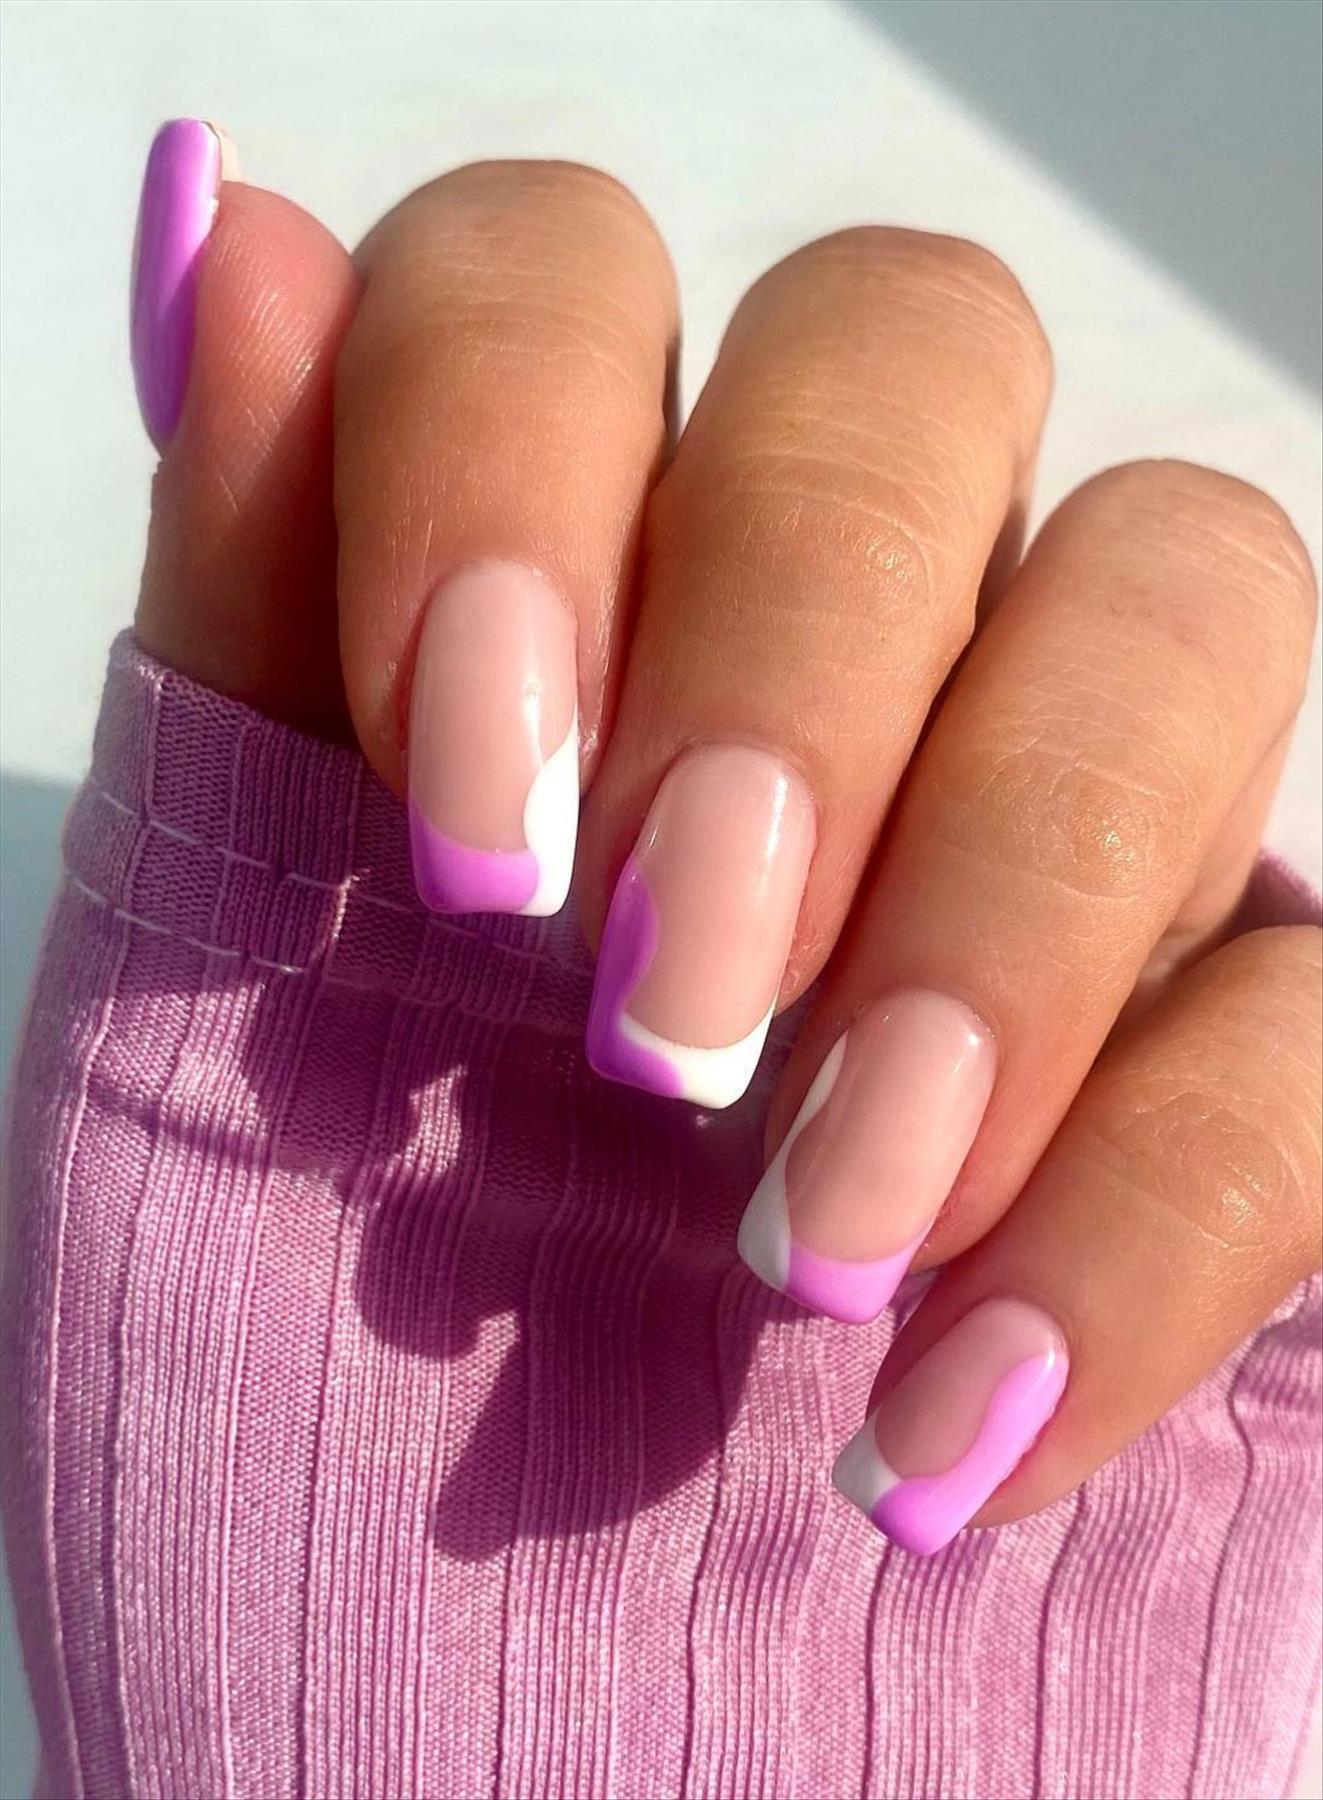 Best Nude Nail Designs to Try ASAP